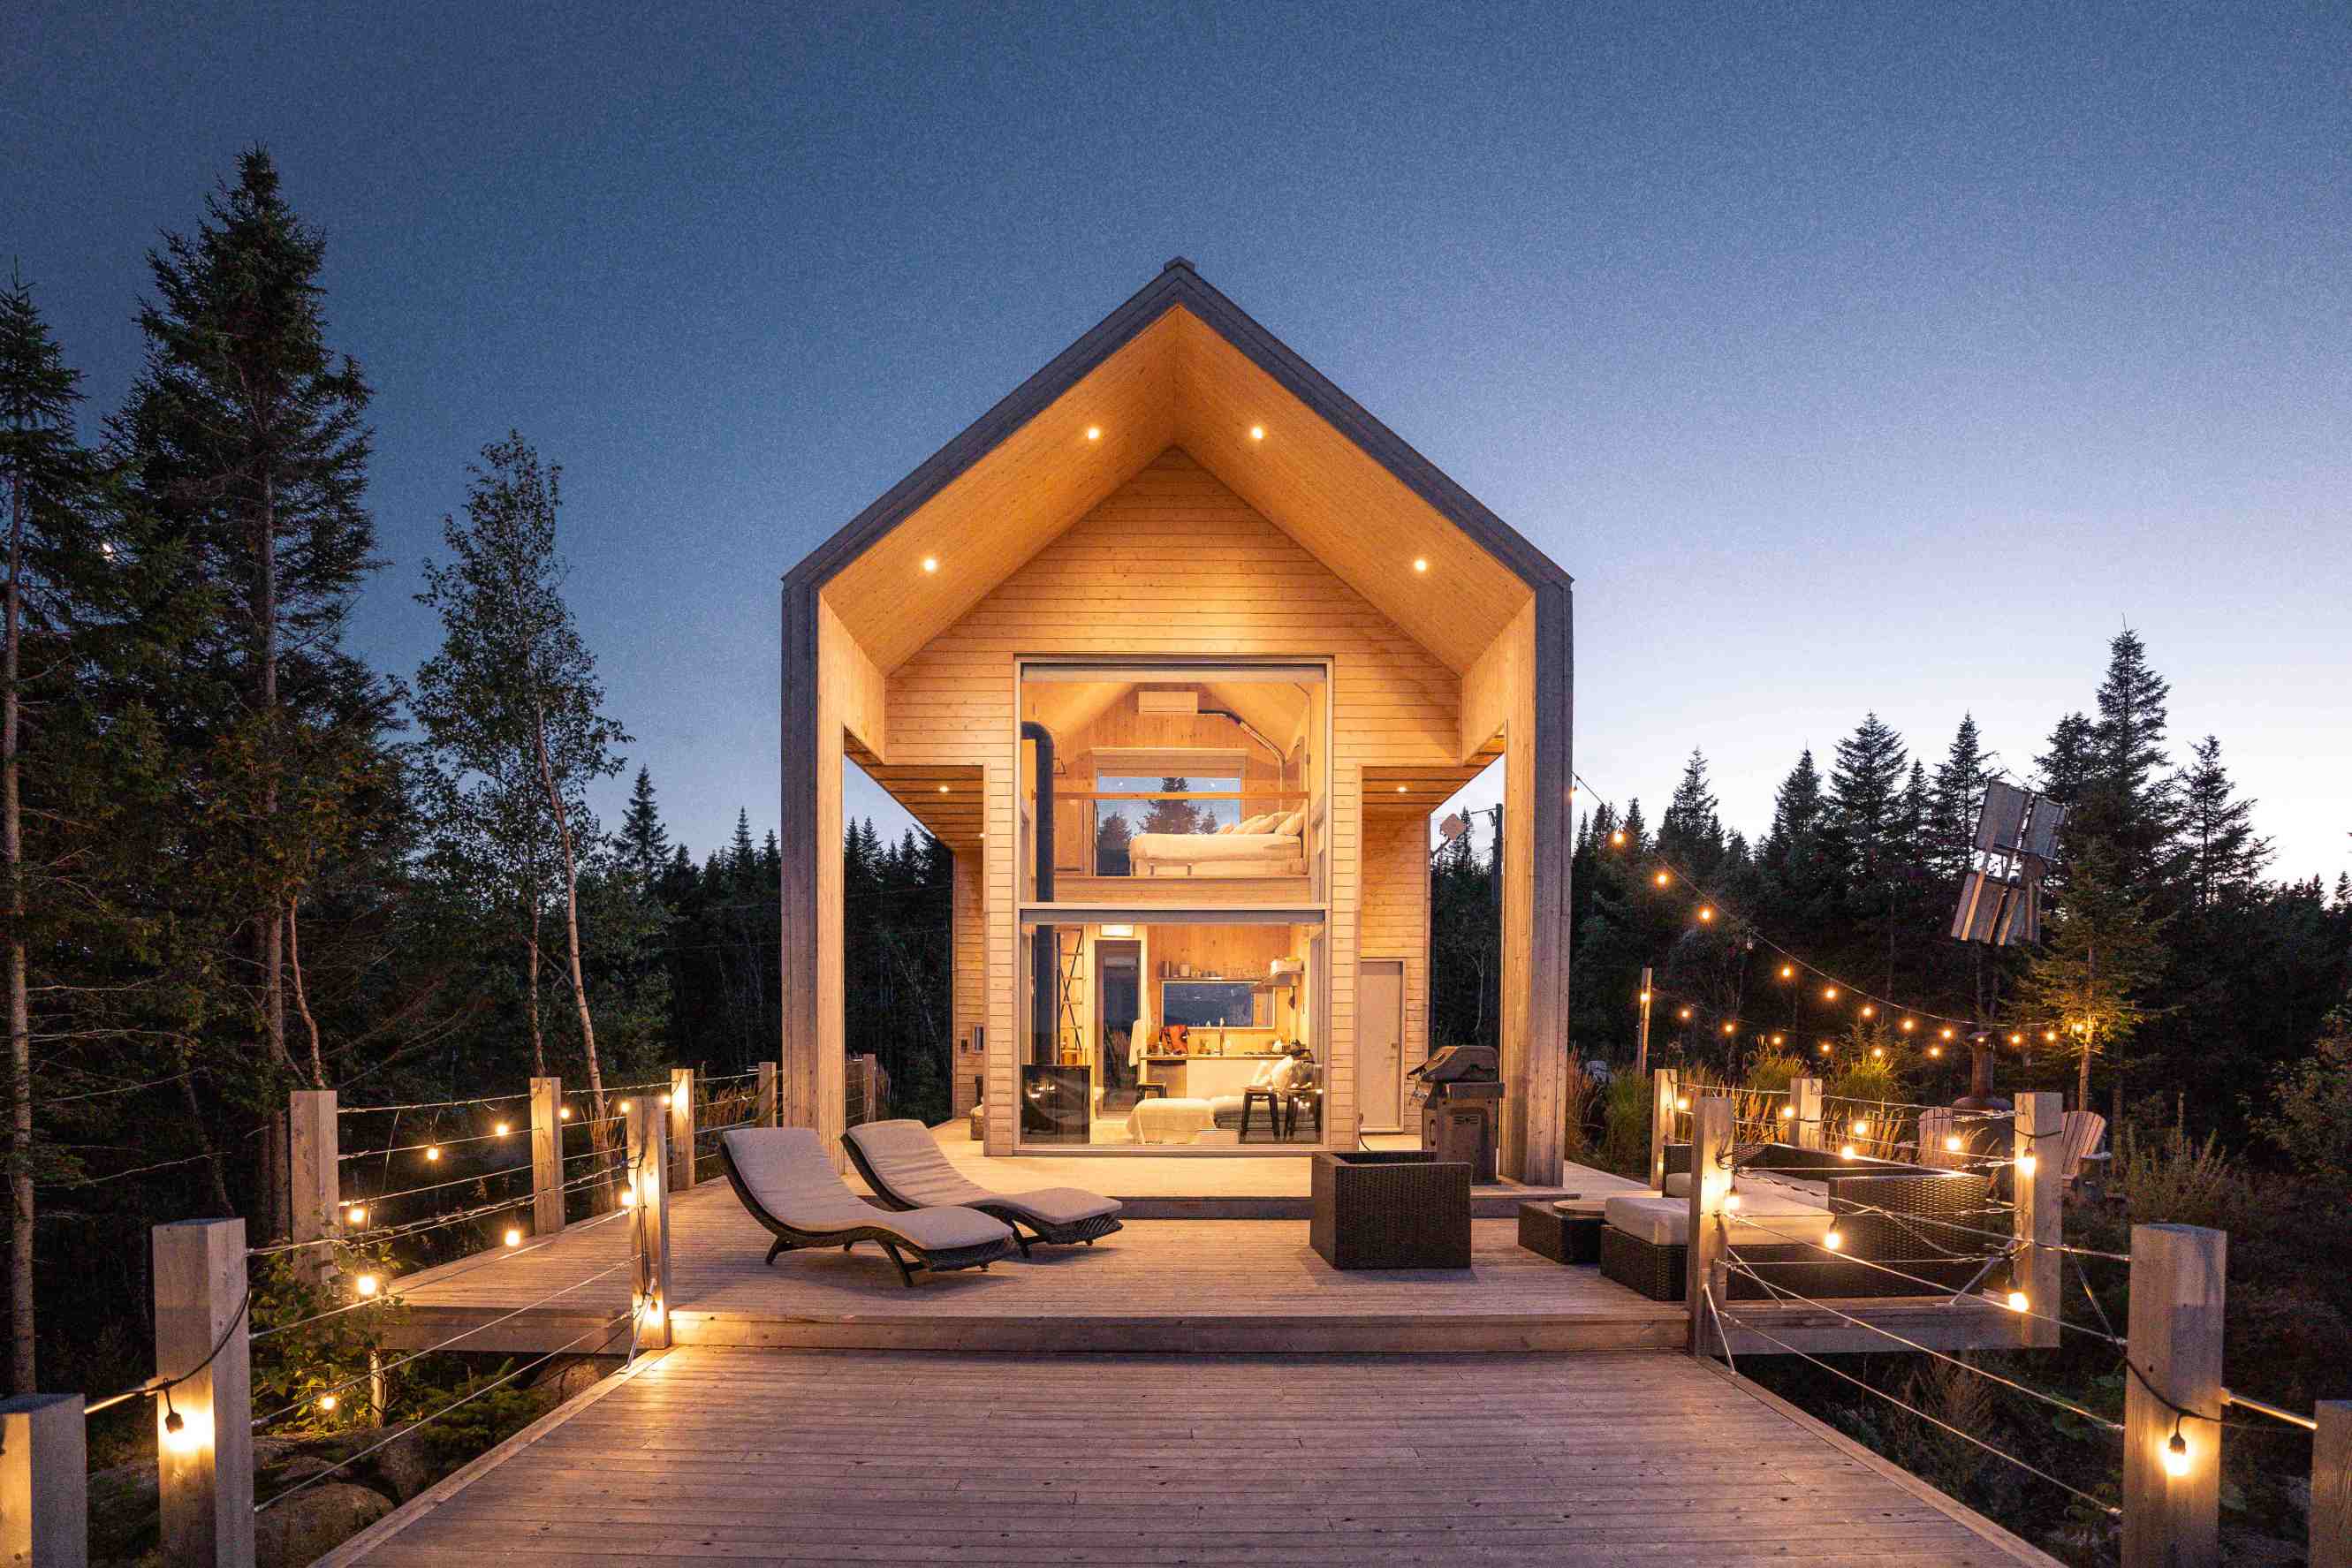 A modern two-story chalet at night with a large wooden patio at the entrance, lit by strings of outdoor lighting.